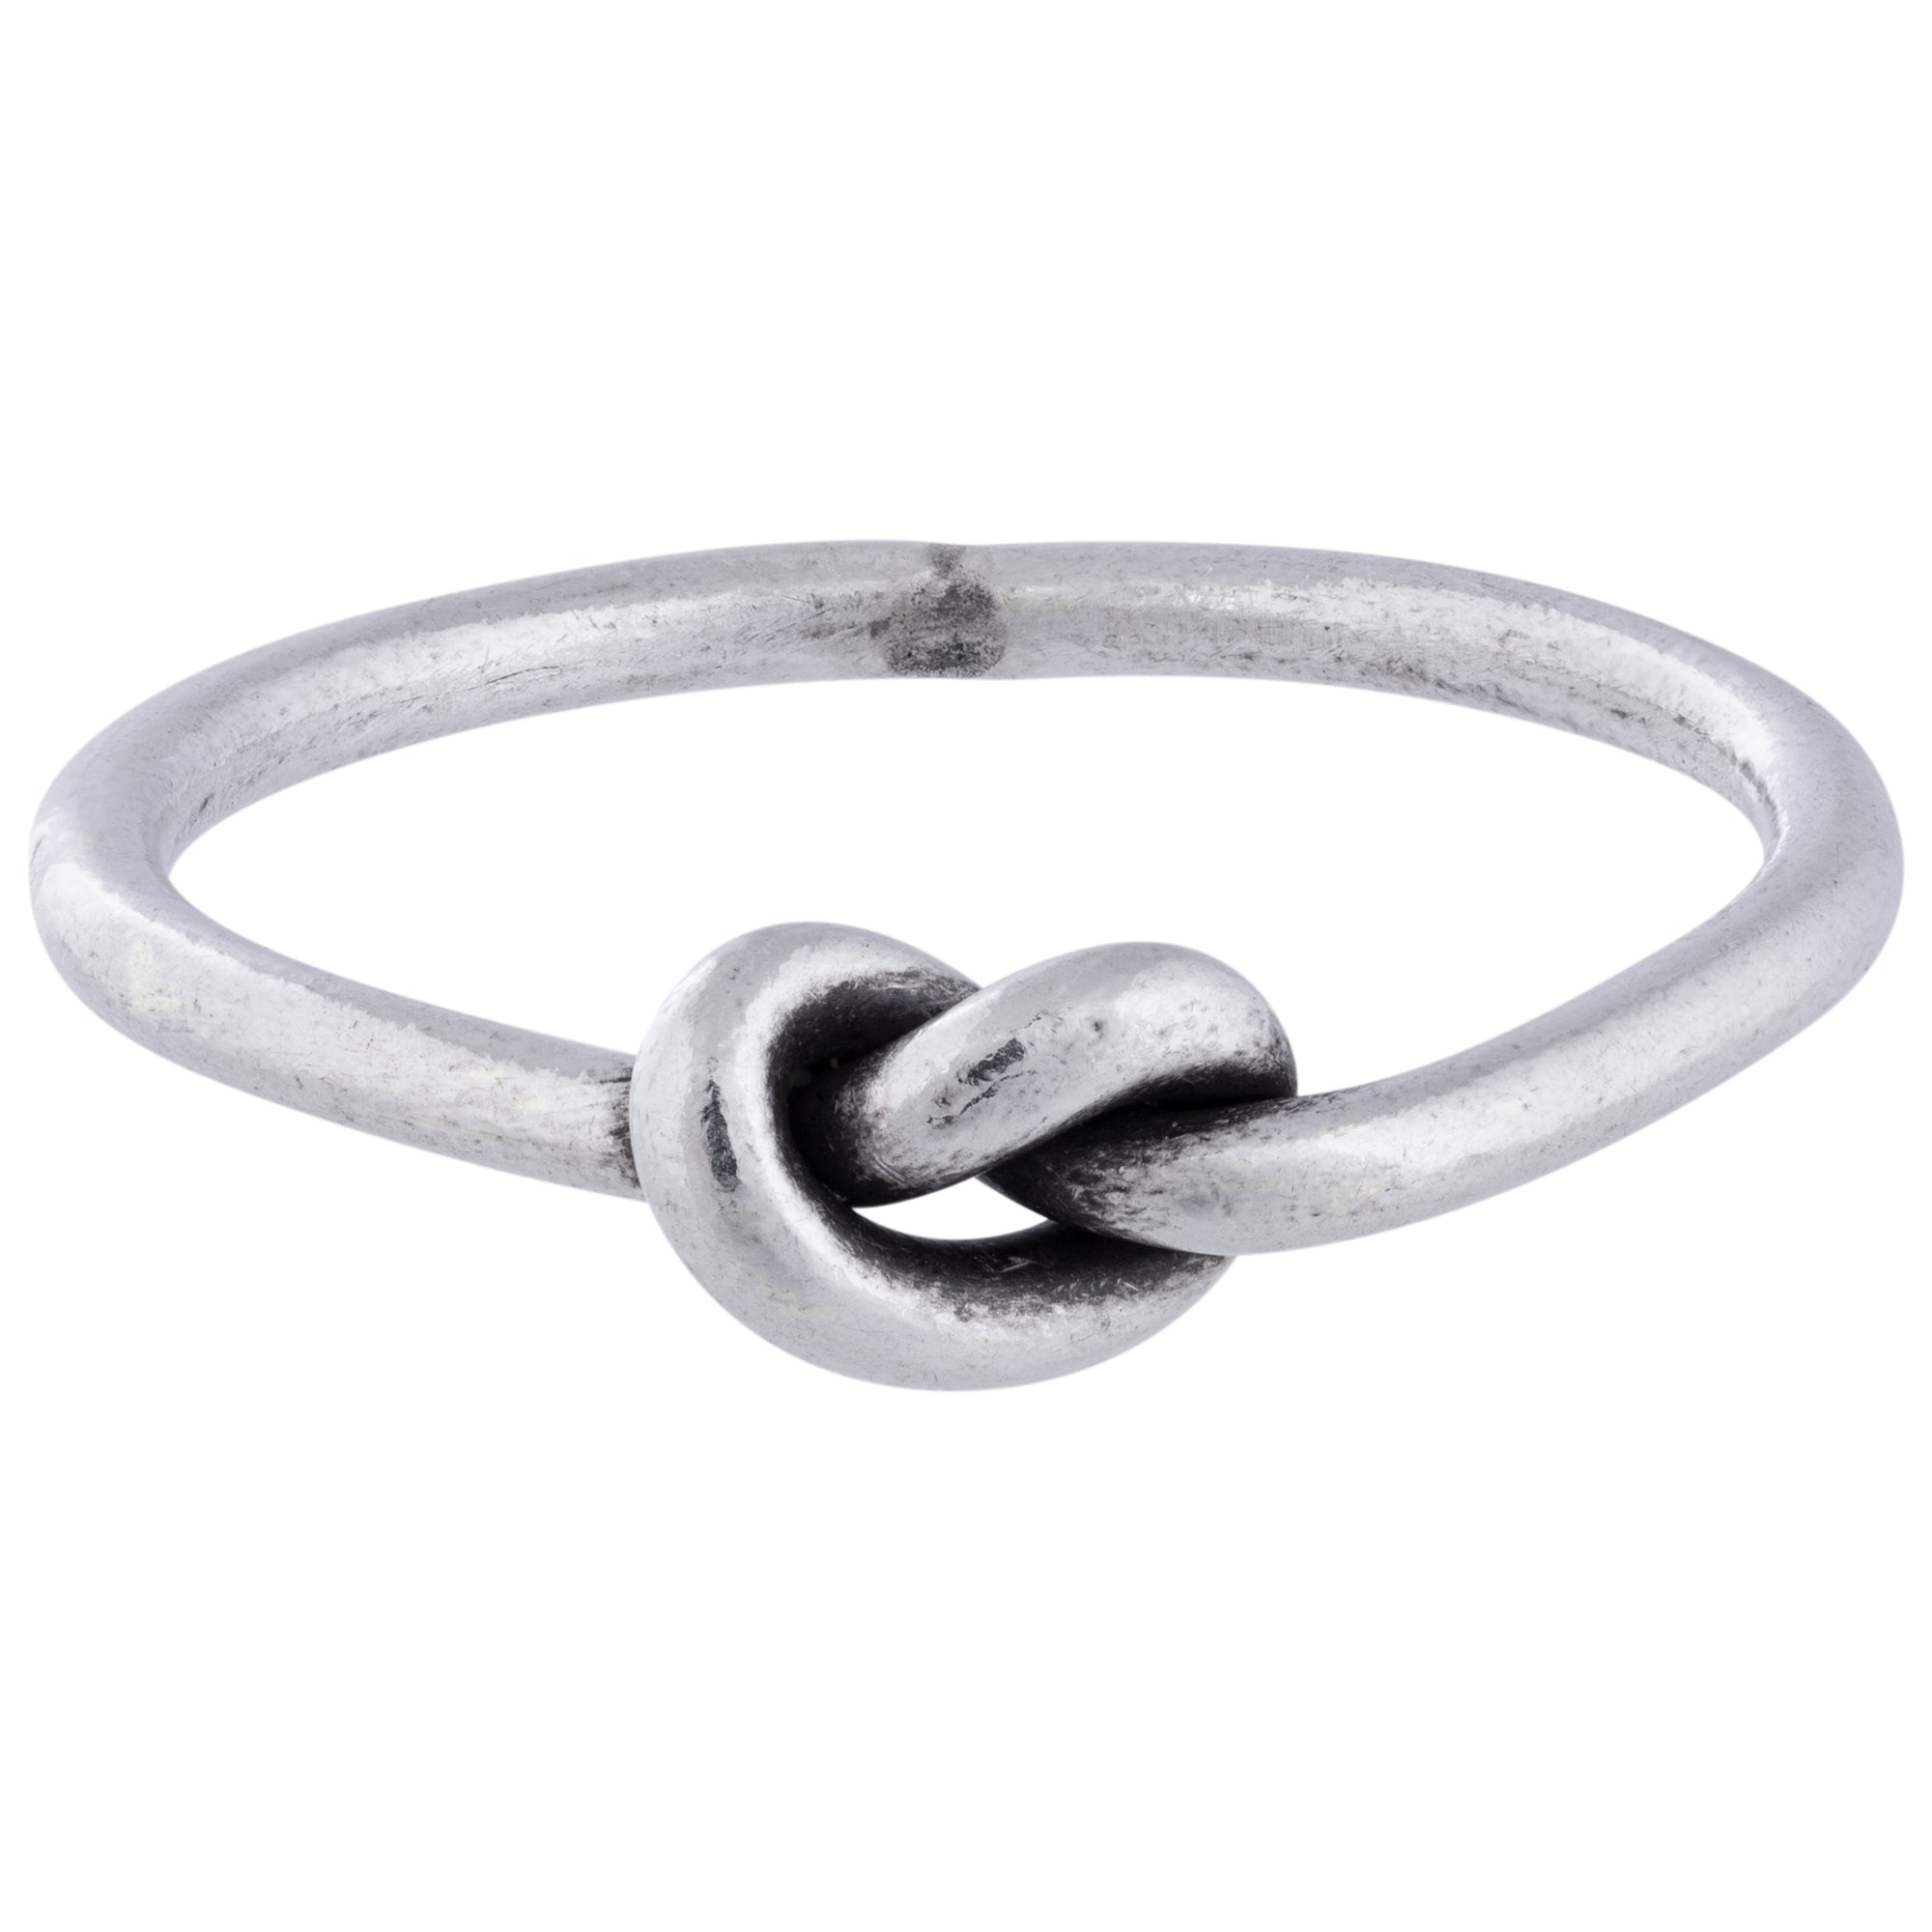 Tiny Knot Sterling Silver Ring - Size 10